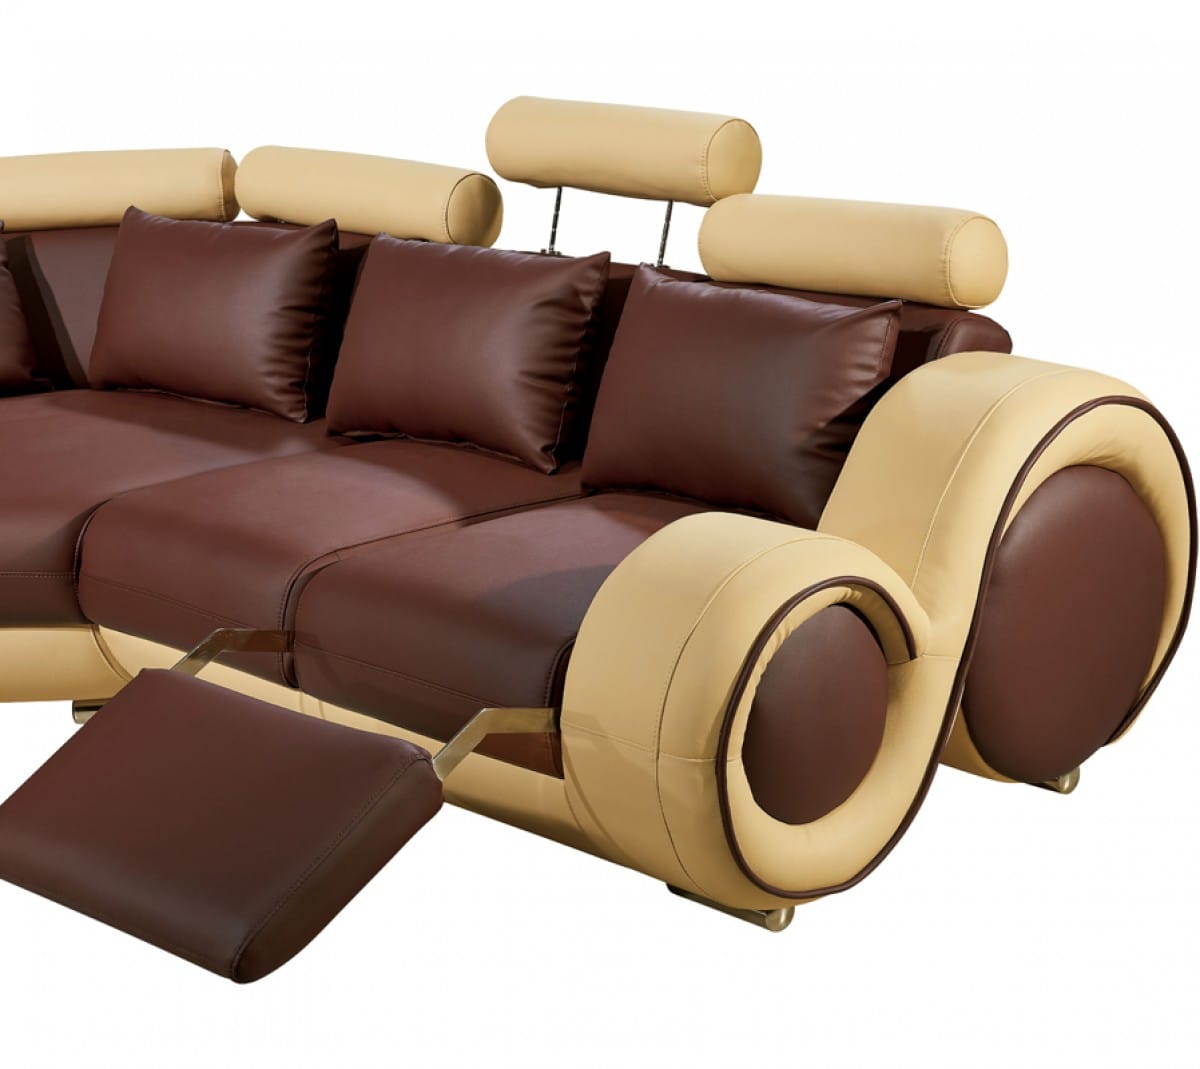 Modern Bonded Leather Sectional Sofa